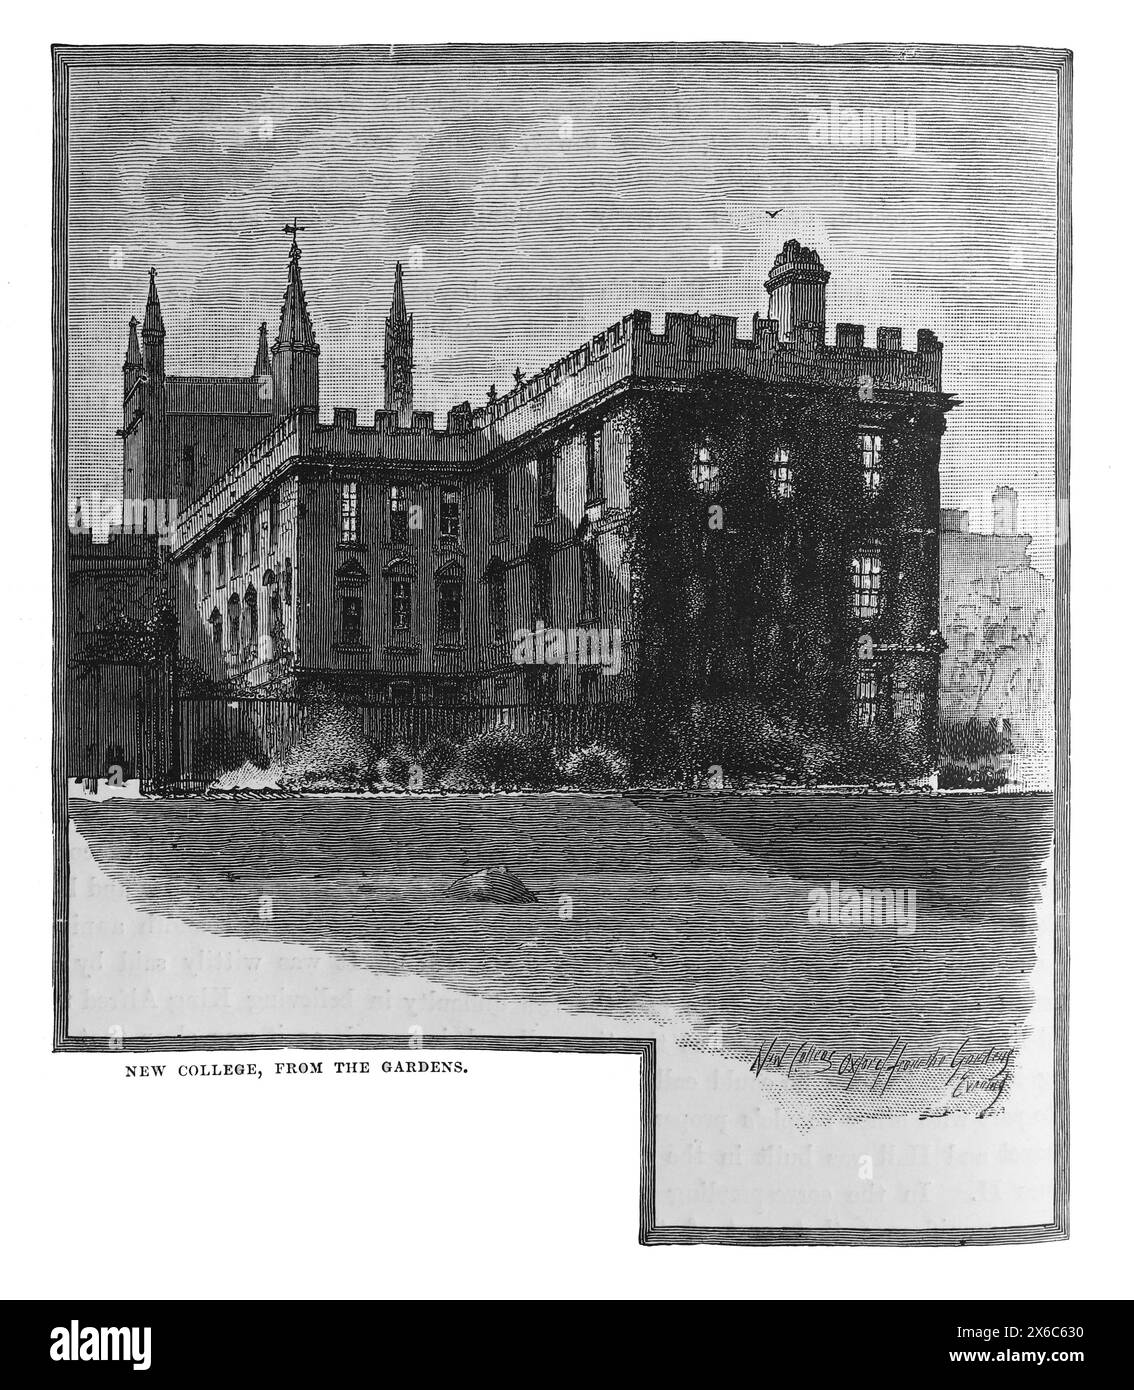 New College, Oxford, viewed from the gardens. Late 19th century. Black and White Illustration from Our Own Country Vol III published by Cassell, Petter, Galpin & Co. in the late 19th century. Stock Photo